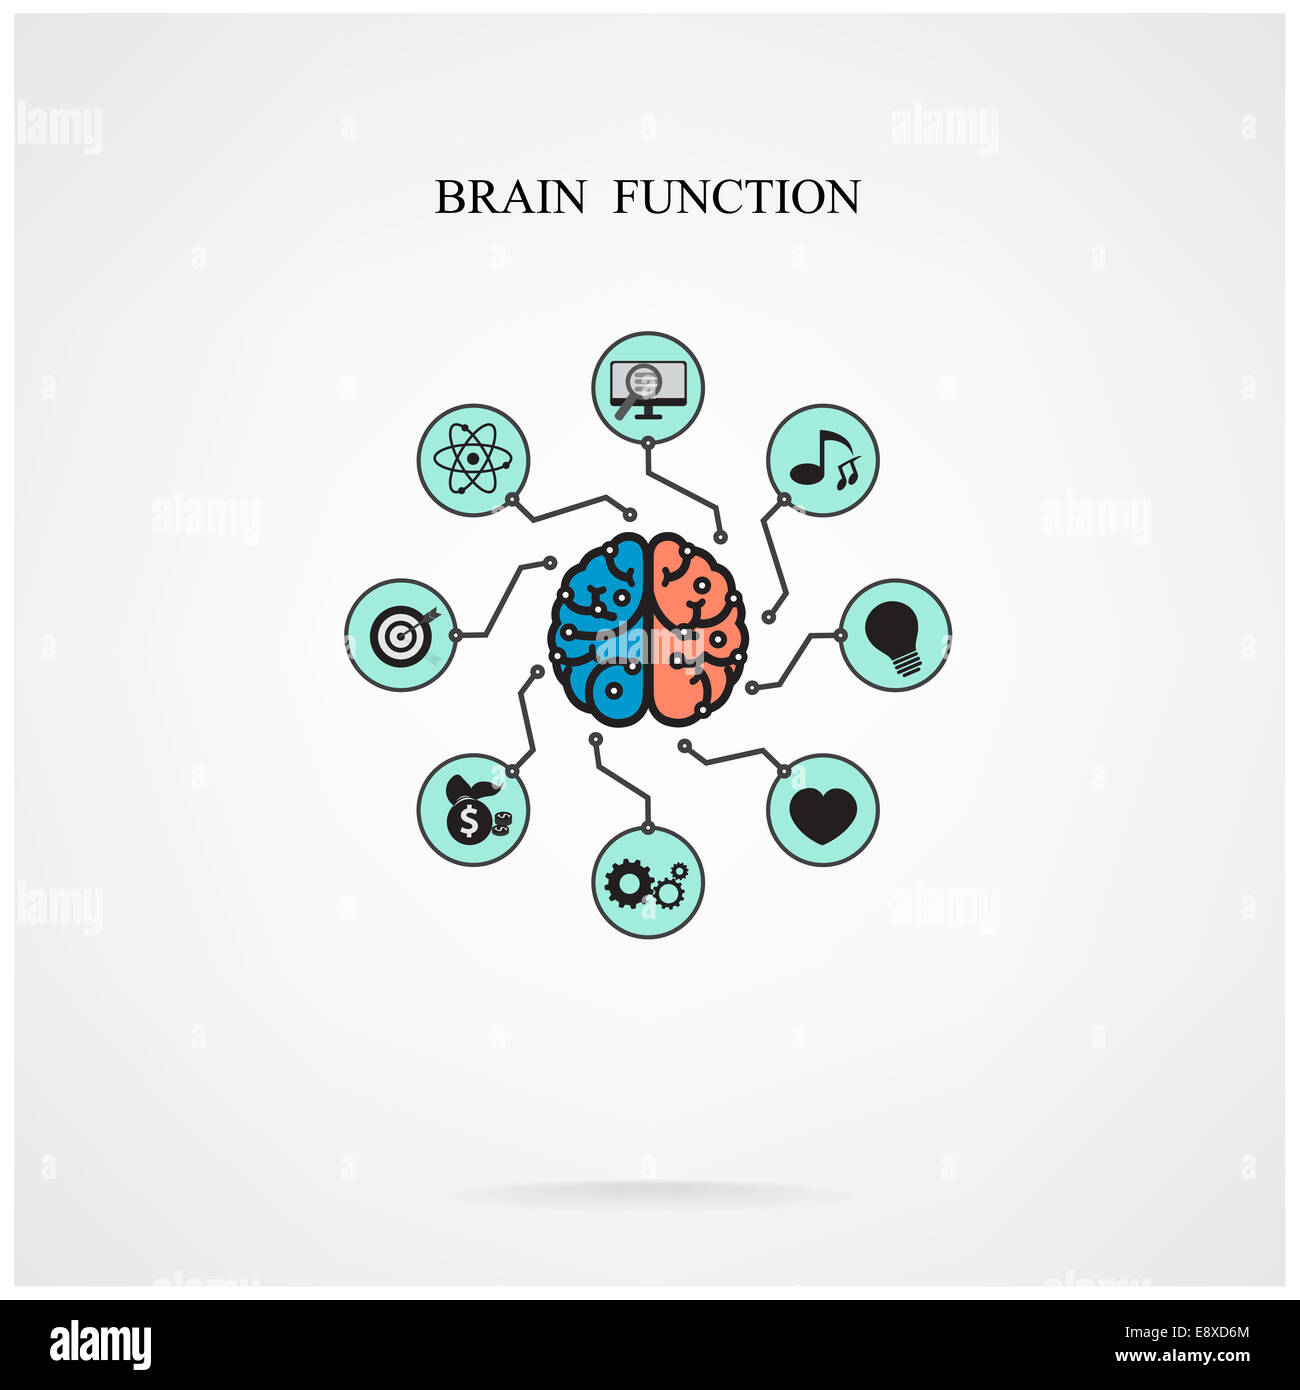 Concept of brain function for education and science, business sign. Stock Photo